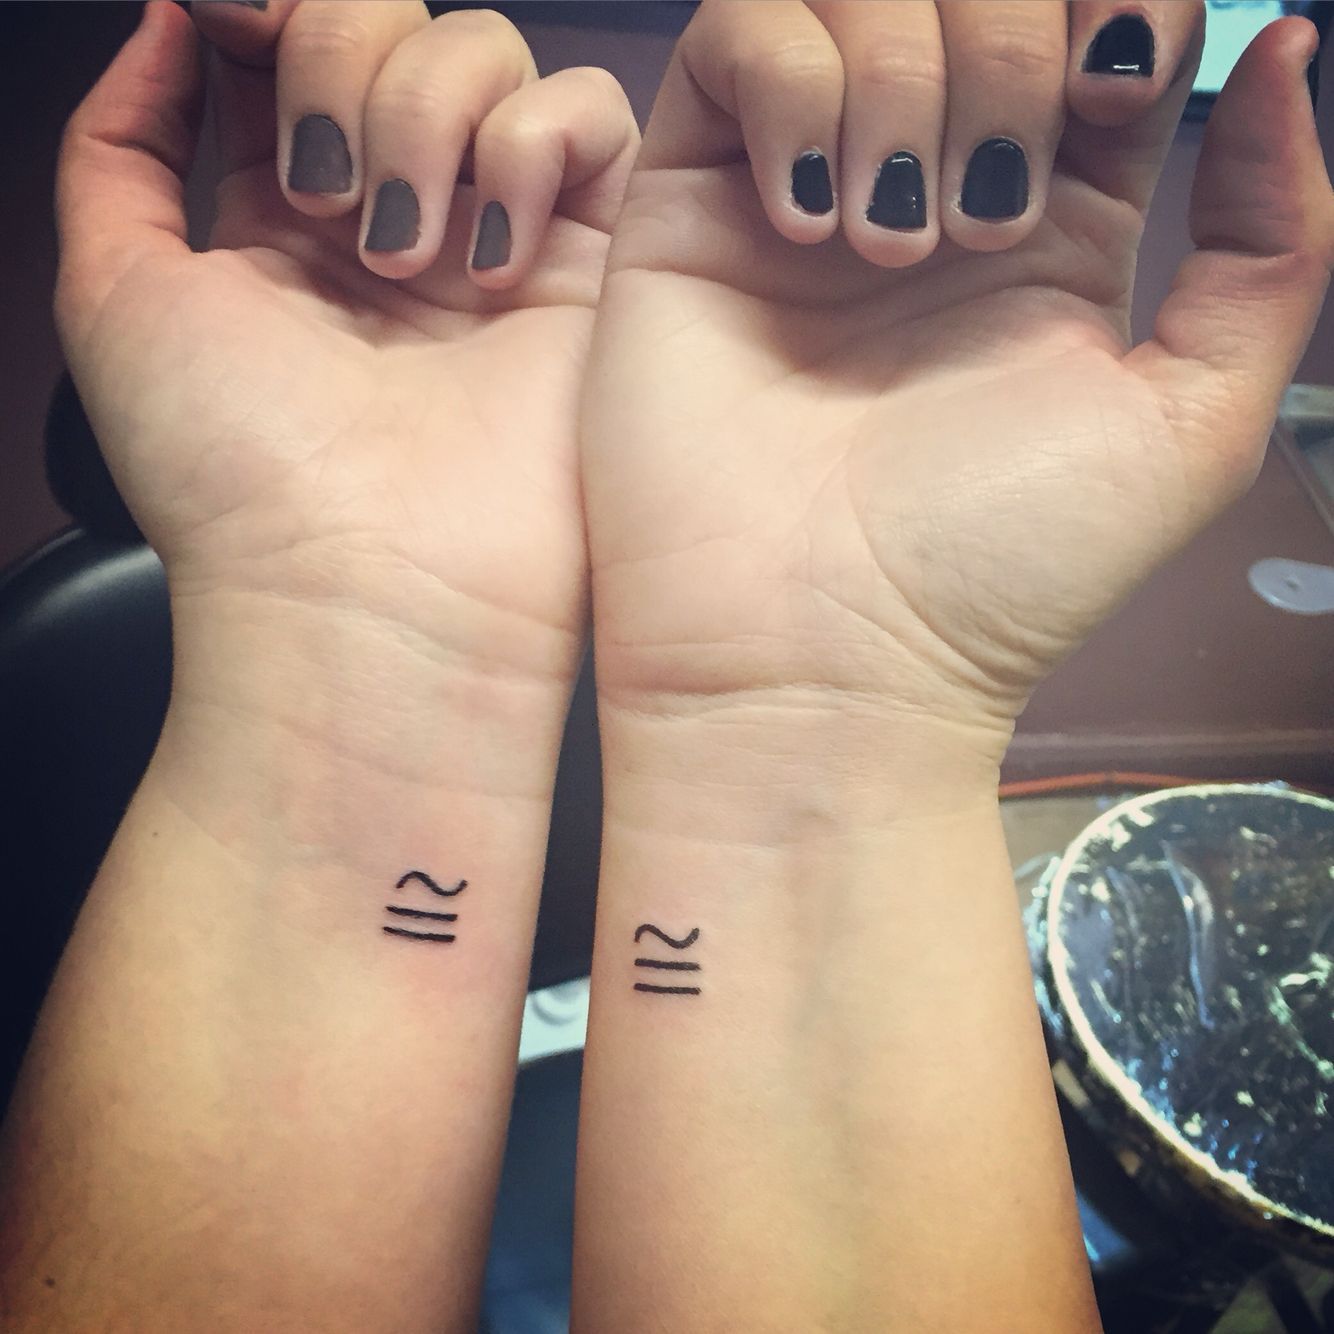 Twin tattoo, the mathematical symbol for congruence- meaning the same but different, sister tattoo, sibling tattoo